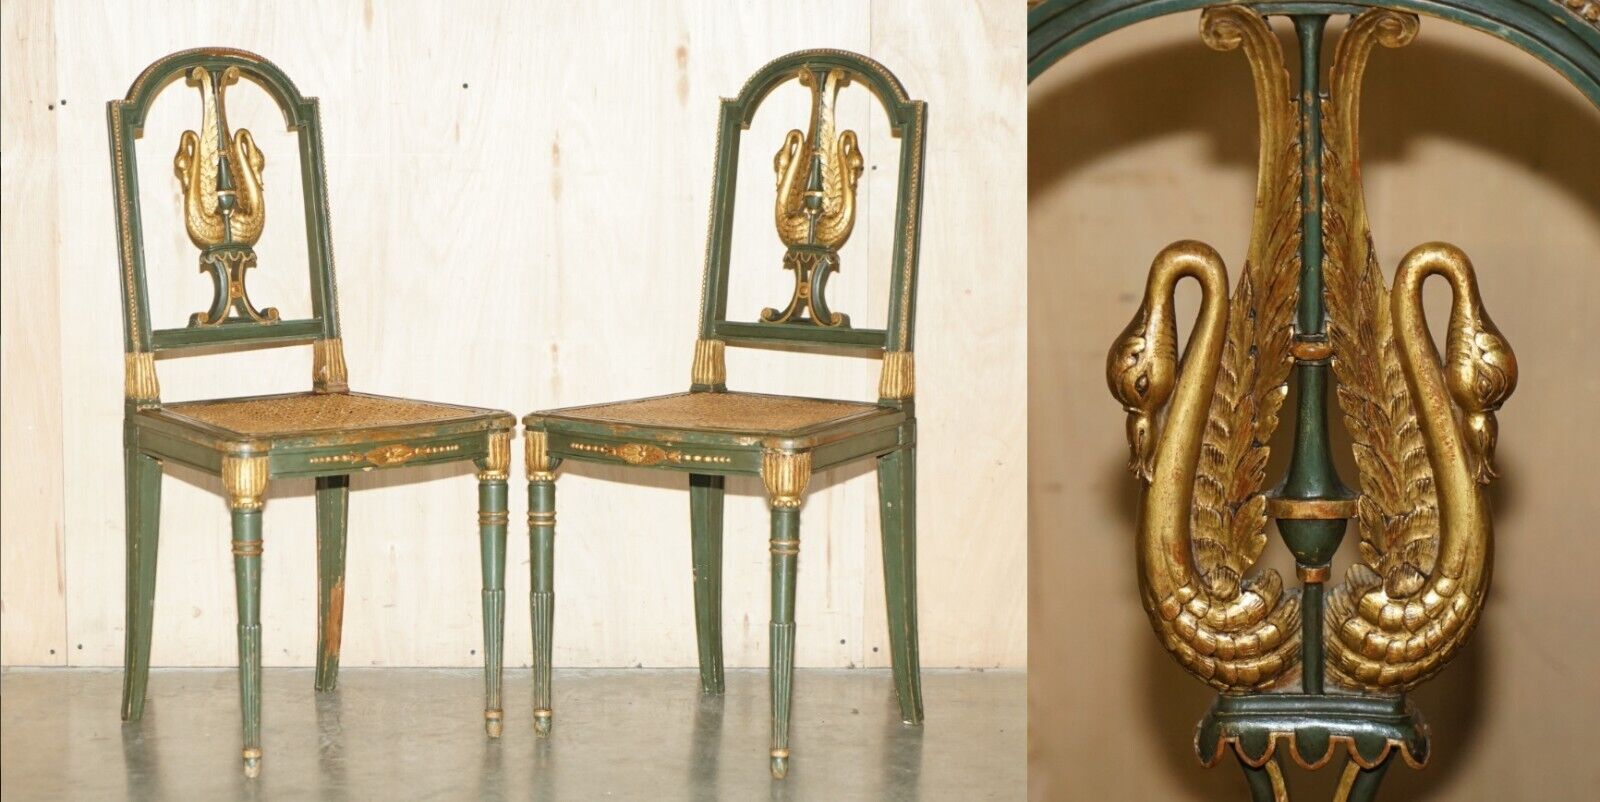 ANTIQUE PAIR OF WILLIAM KENT EMPIRE GREEN & GOLD GILT SWAN CARVED SIDE CHAIRS